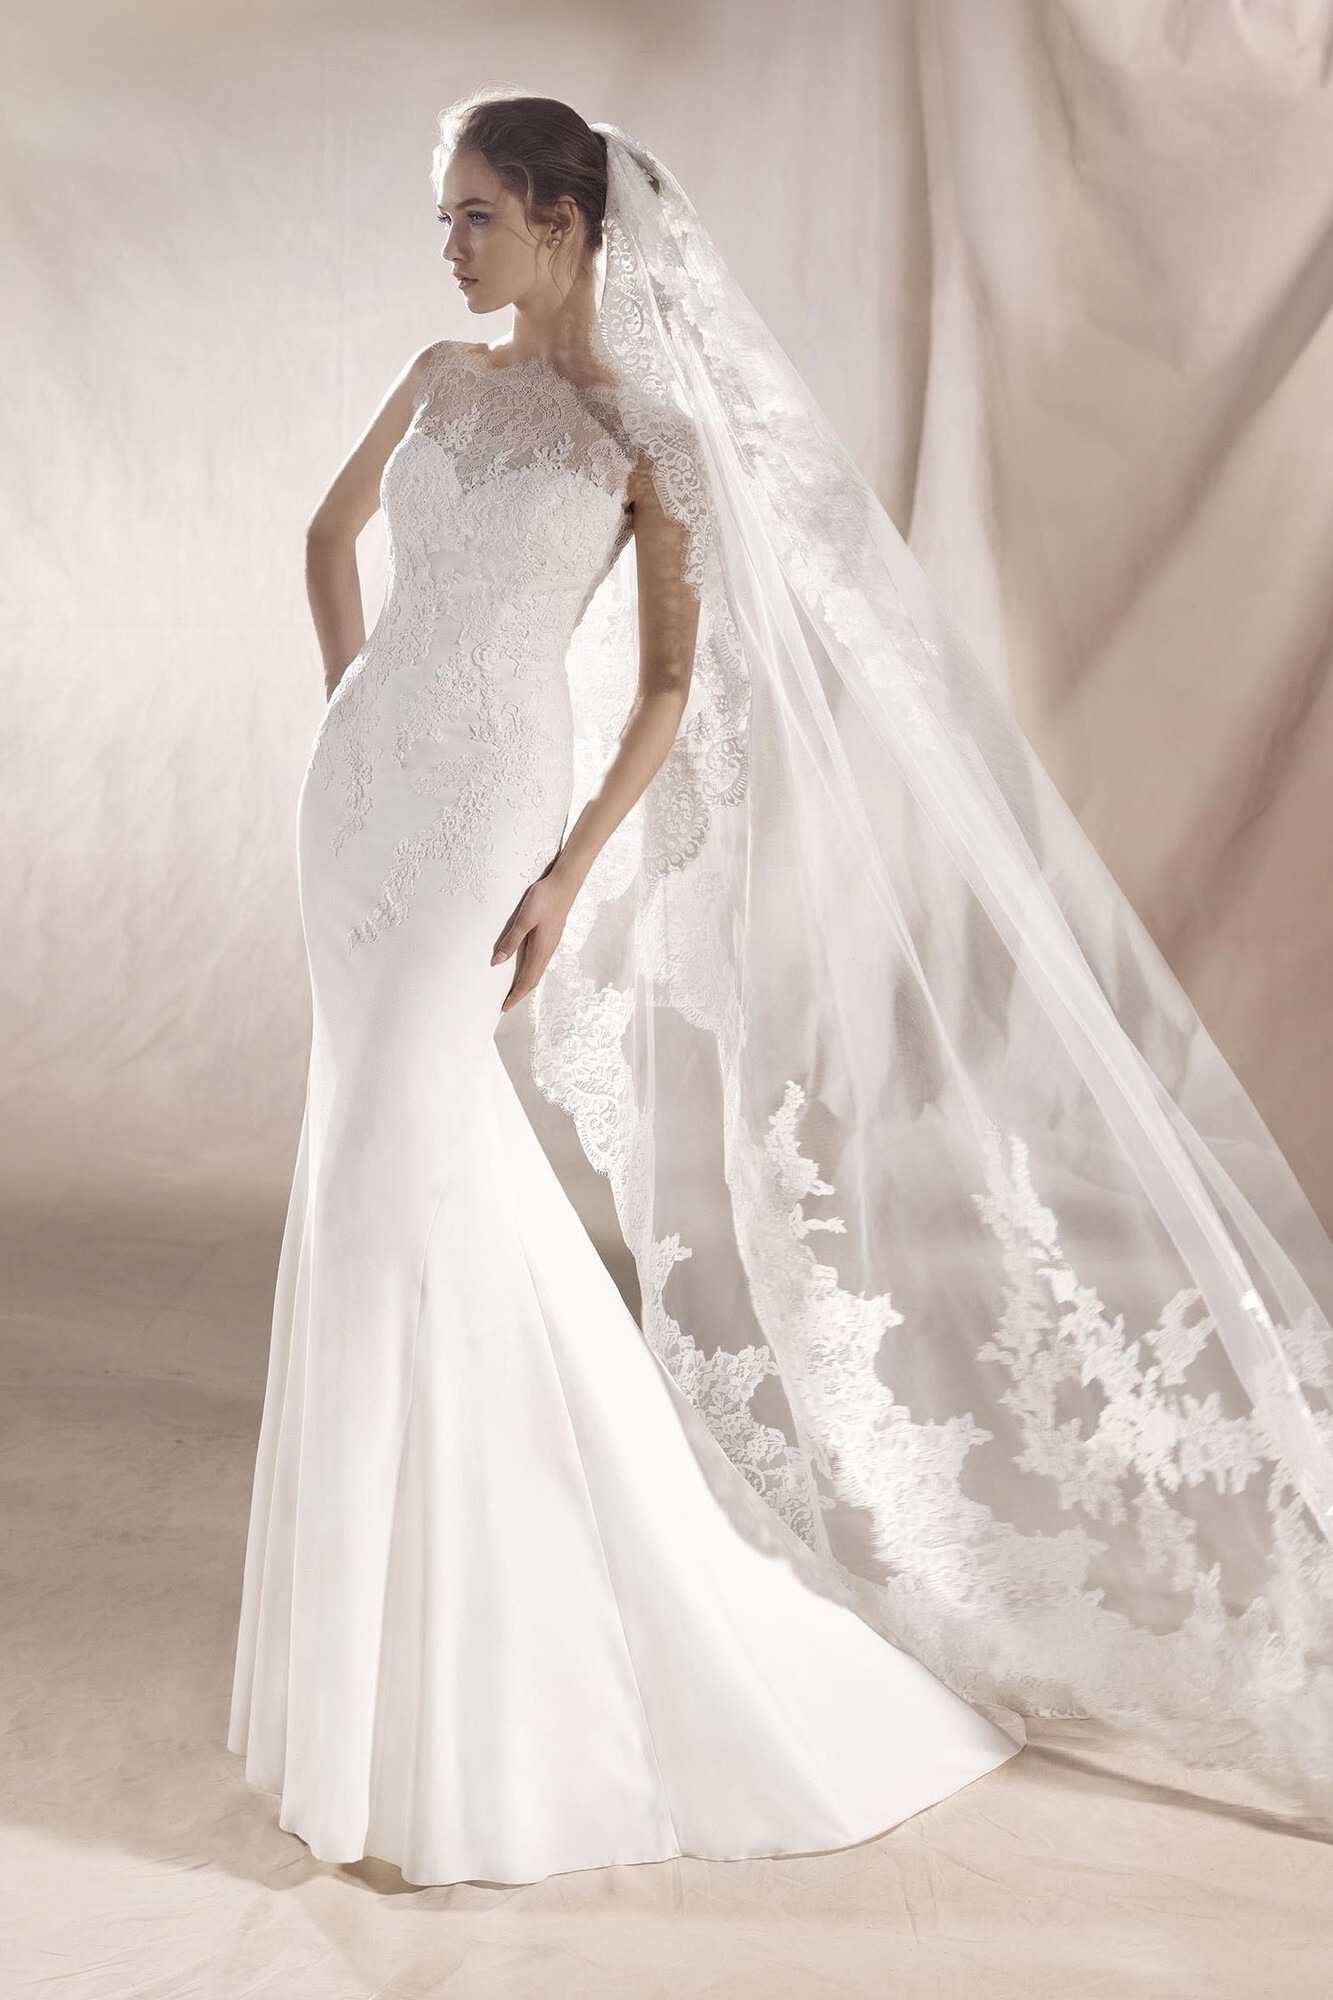 Saturn Wedding Dress from White One - hitched.co.uk